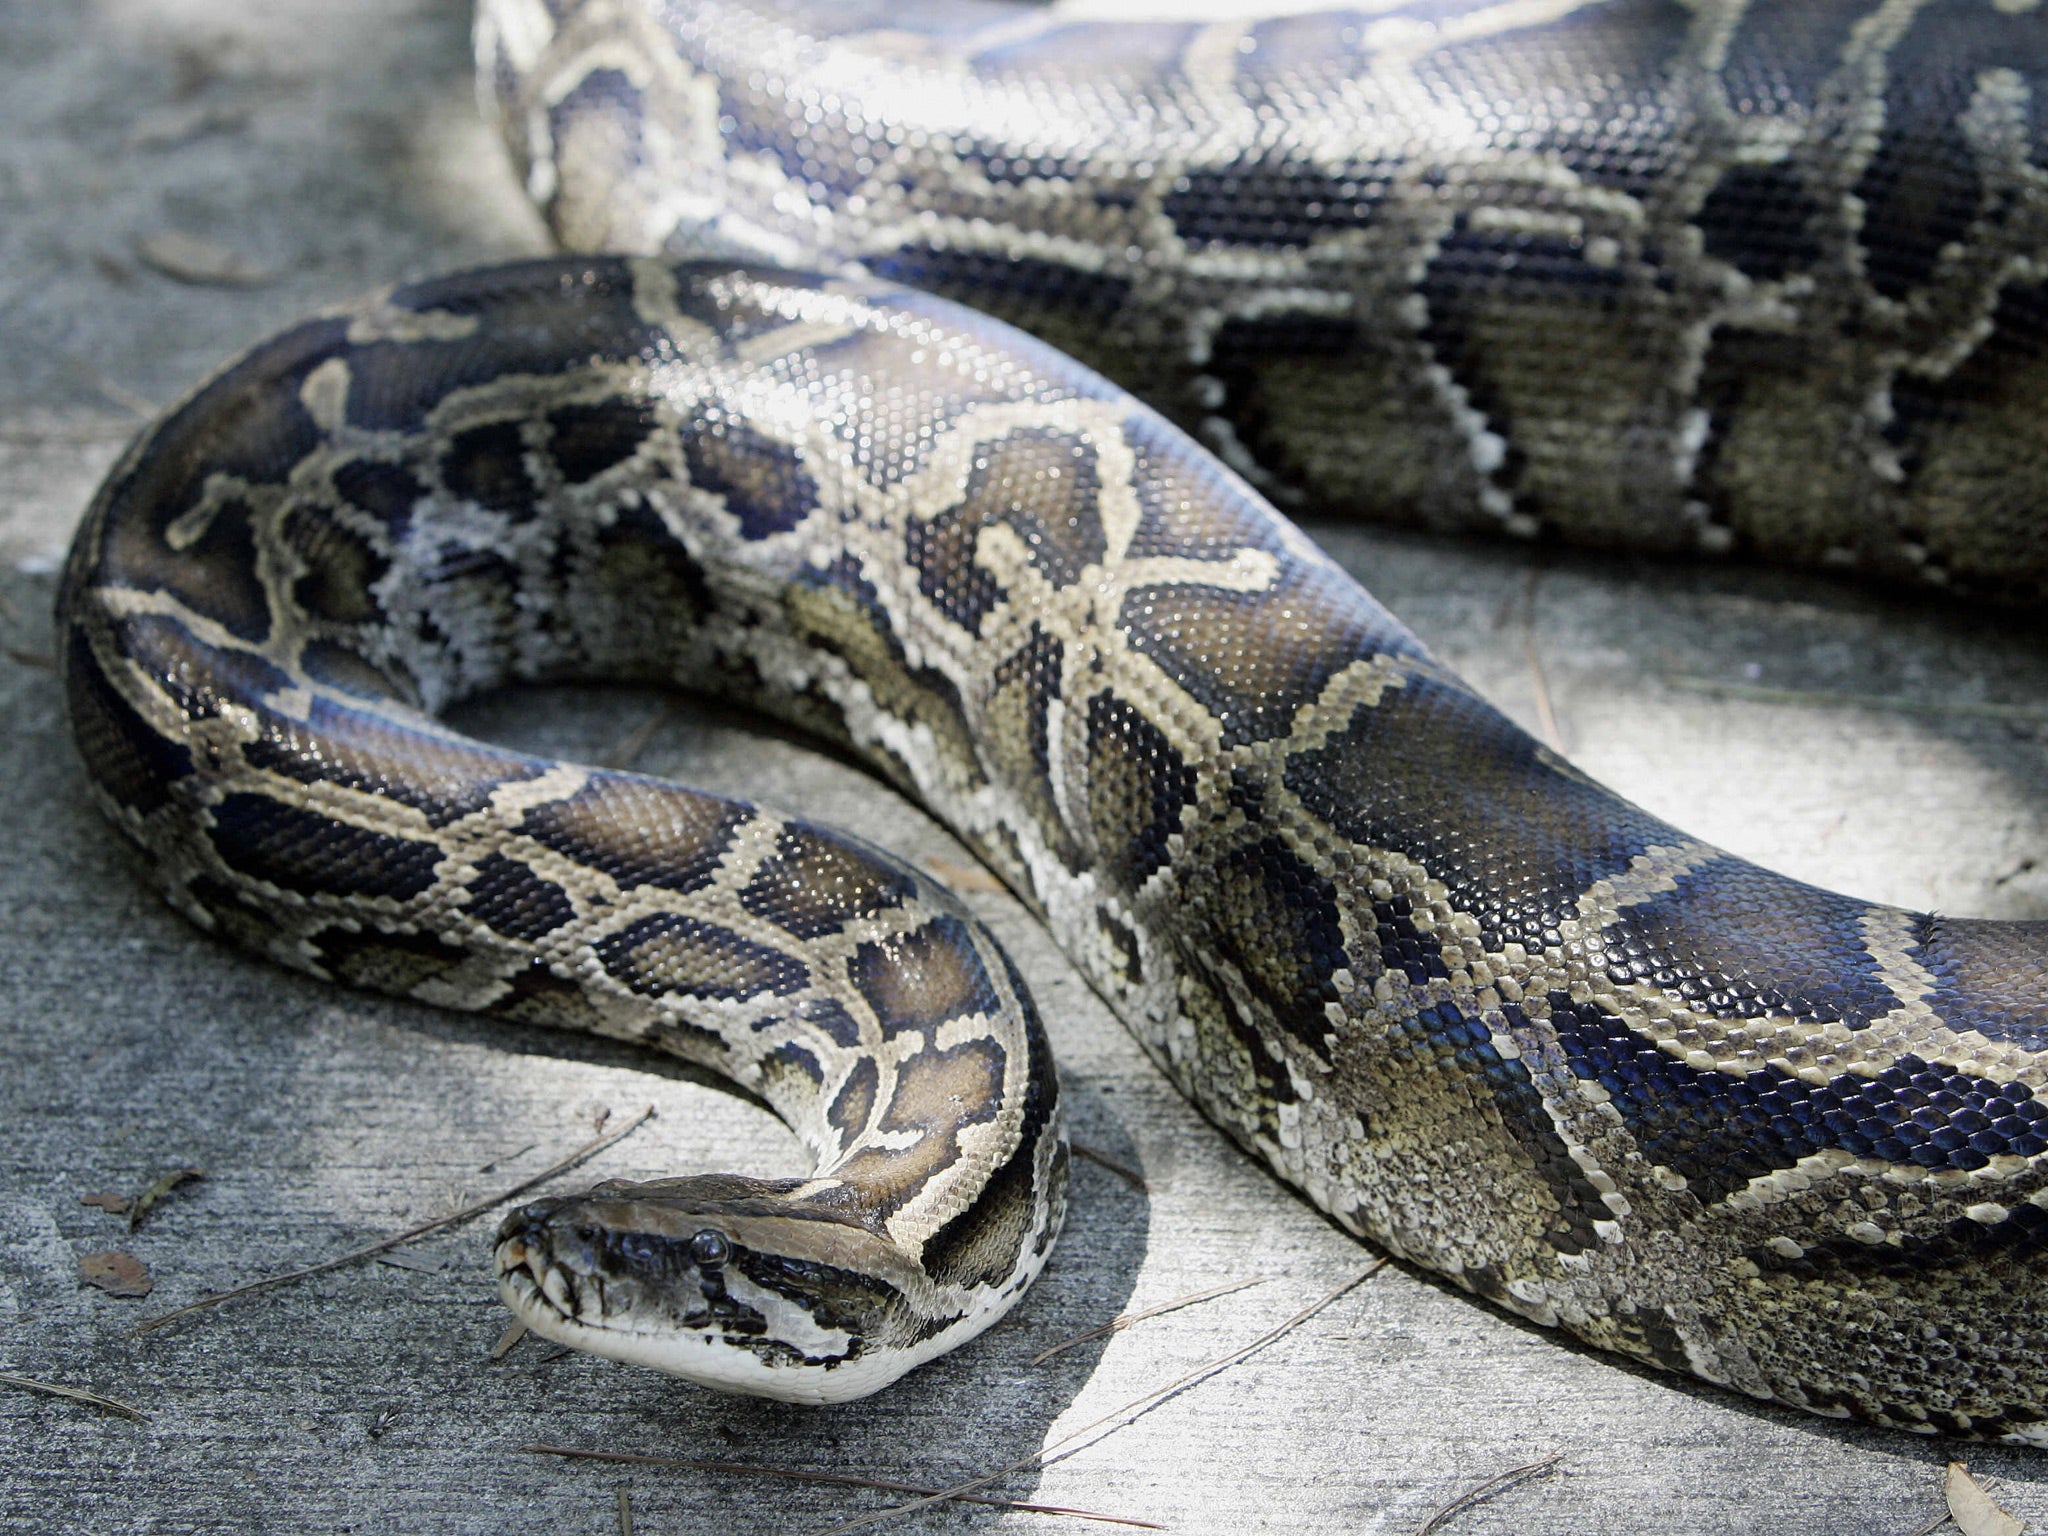 Ironically, it is currently illegal to hunt and kill pythons in Florida, where many are kept as pets, so the meat is imported